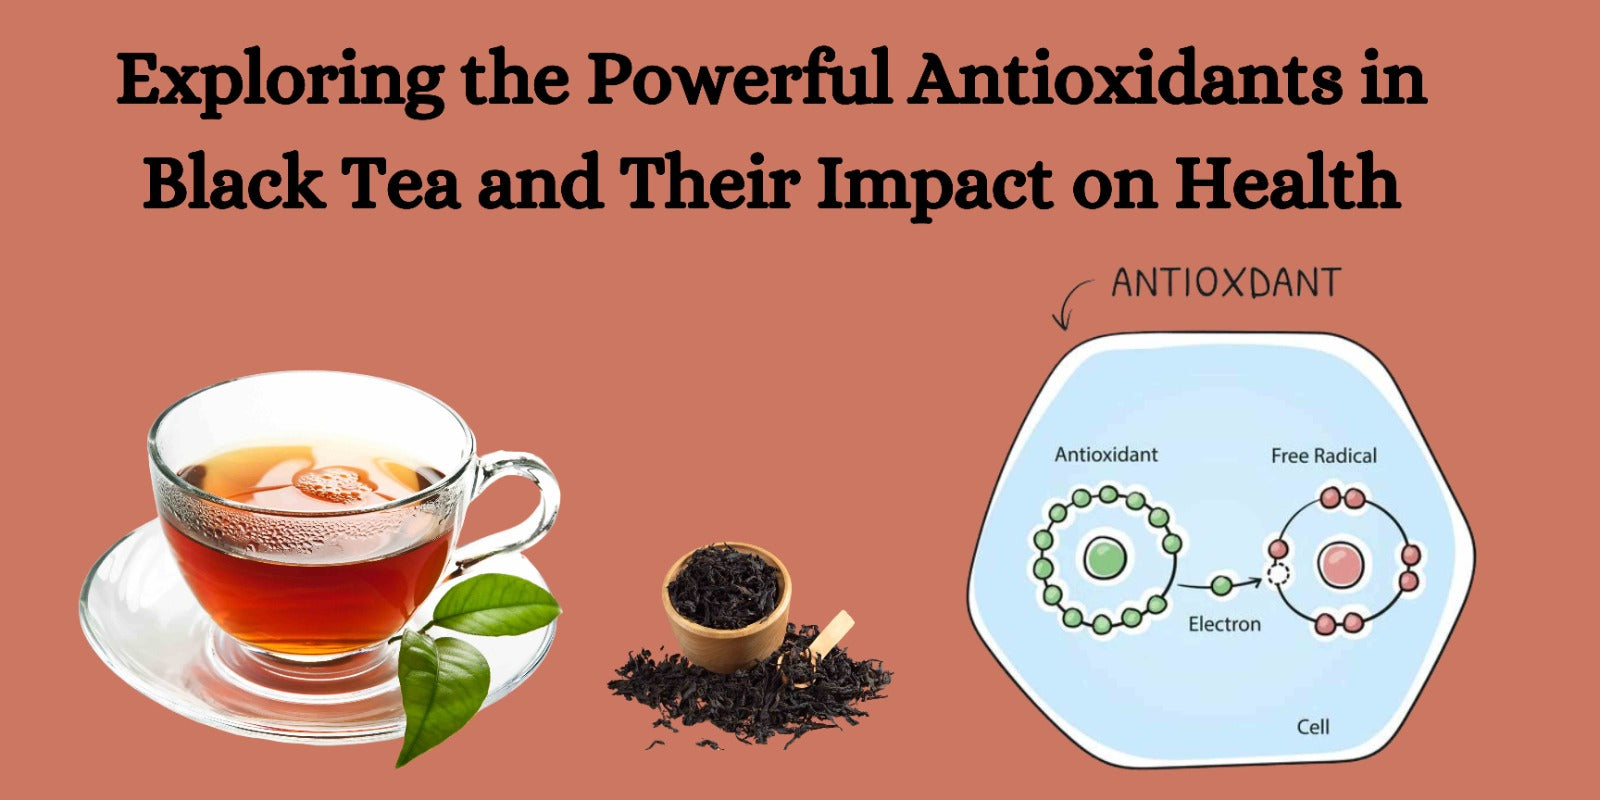 Exploring the Powerful Antioxidants in Black Tea and Their Impact on Health